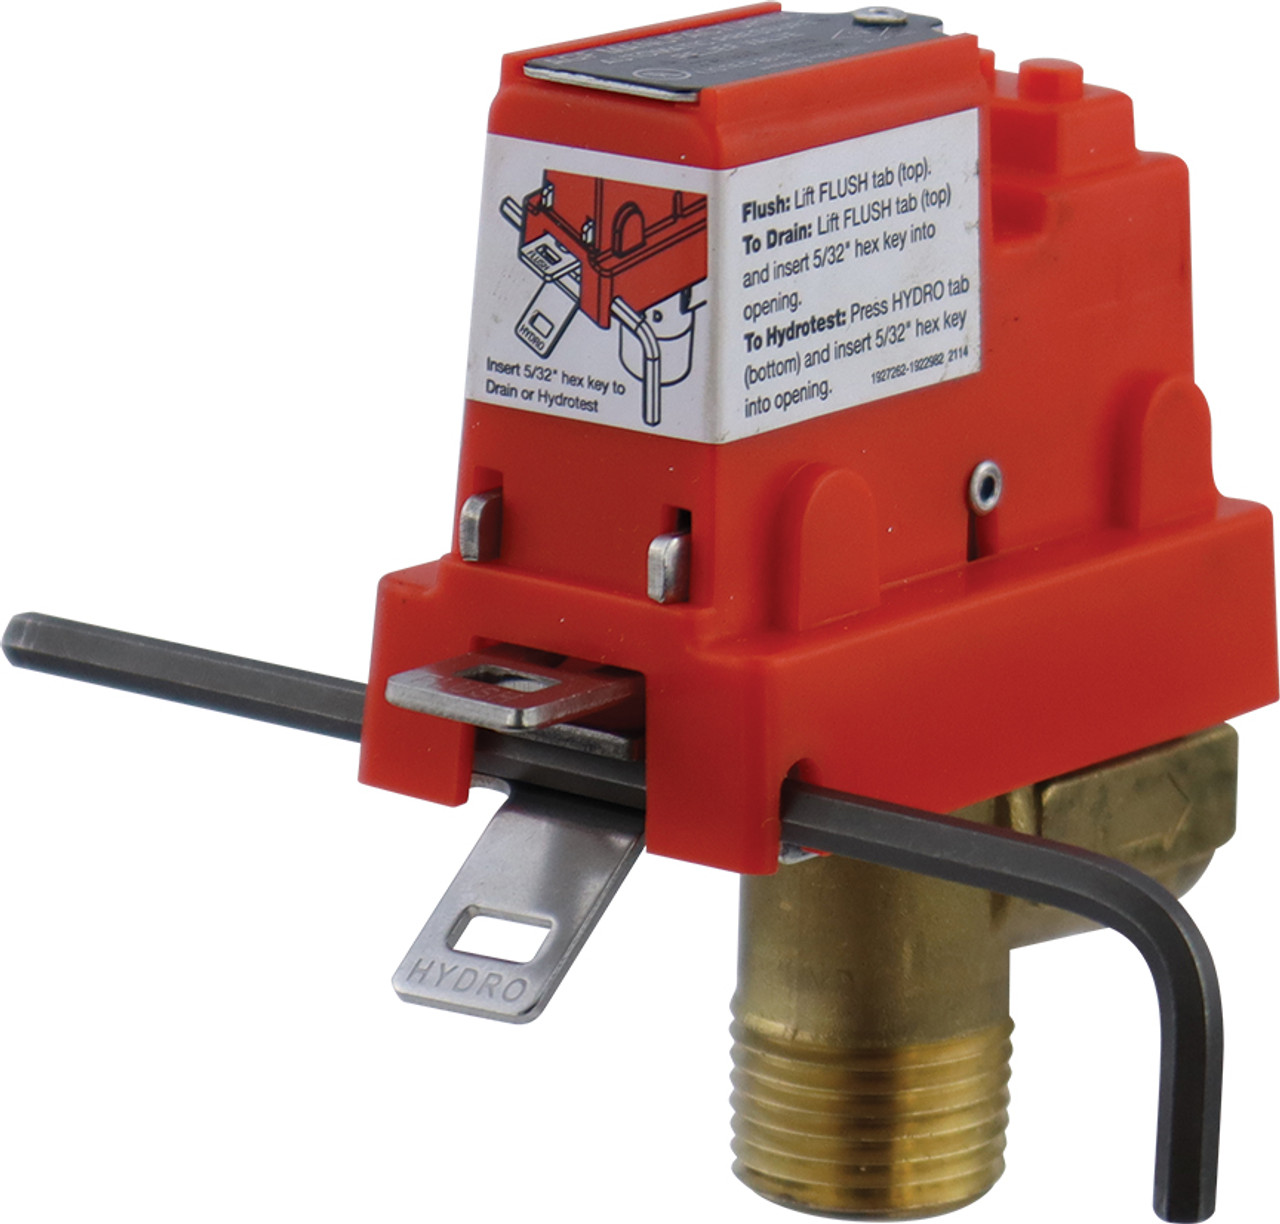 1/2 Lockable Pressure Relief Valve, UL Listed & FM Approved, Model 7000L